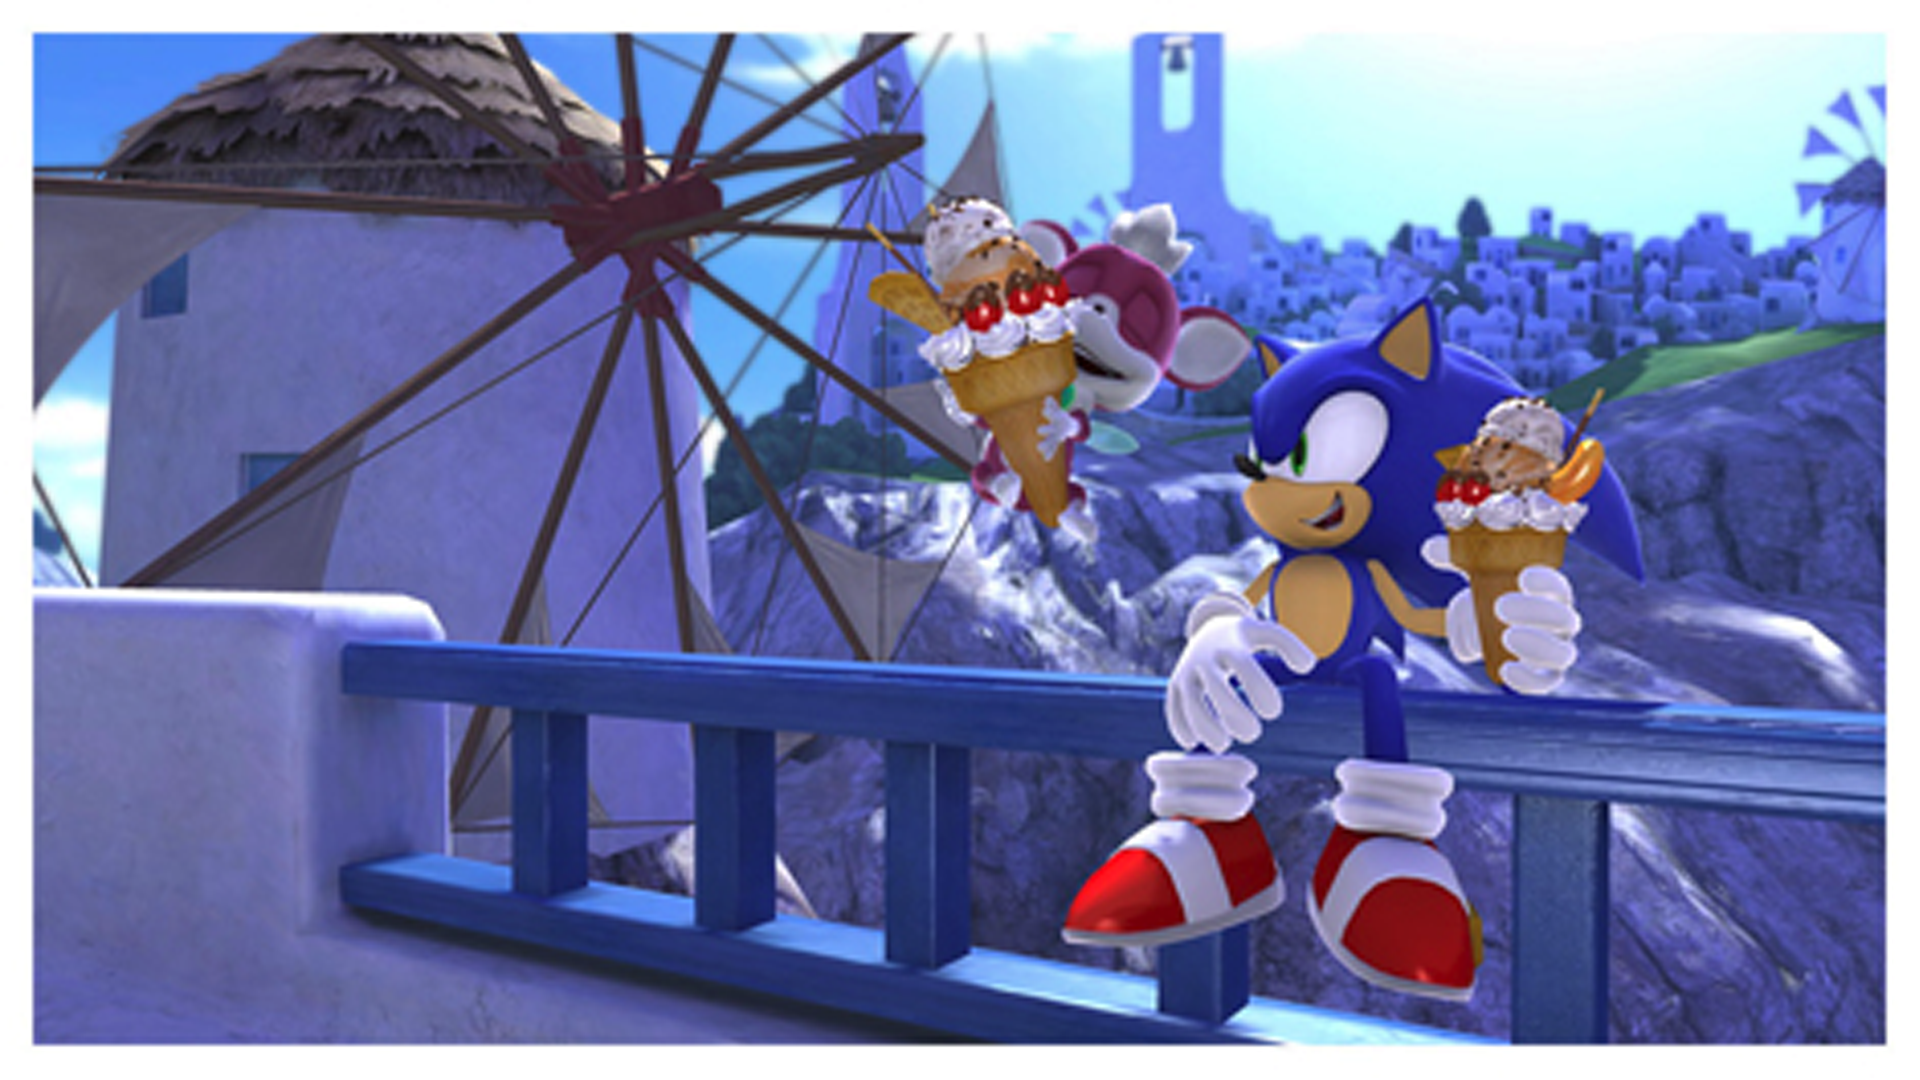 Still from a cutscene in Sonic Unleashed.